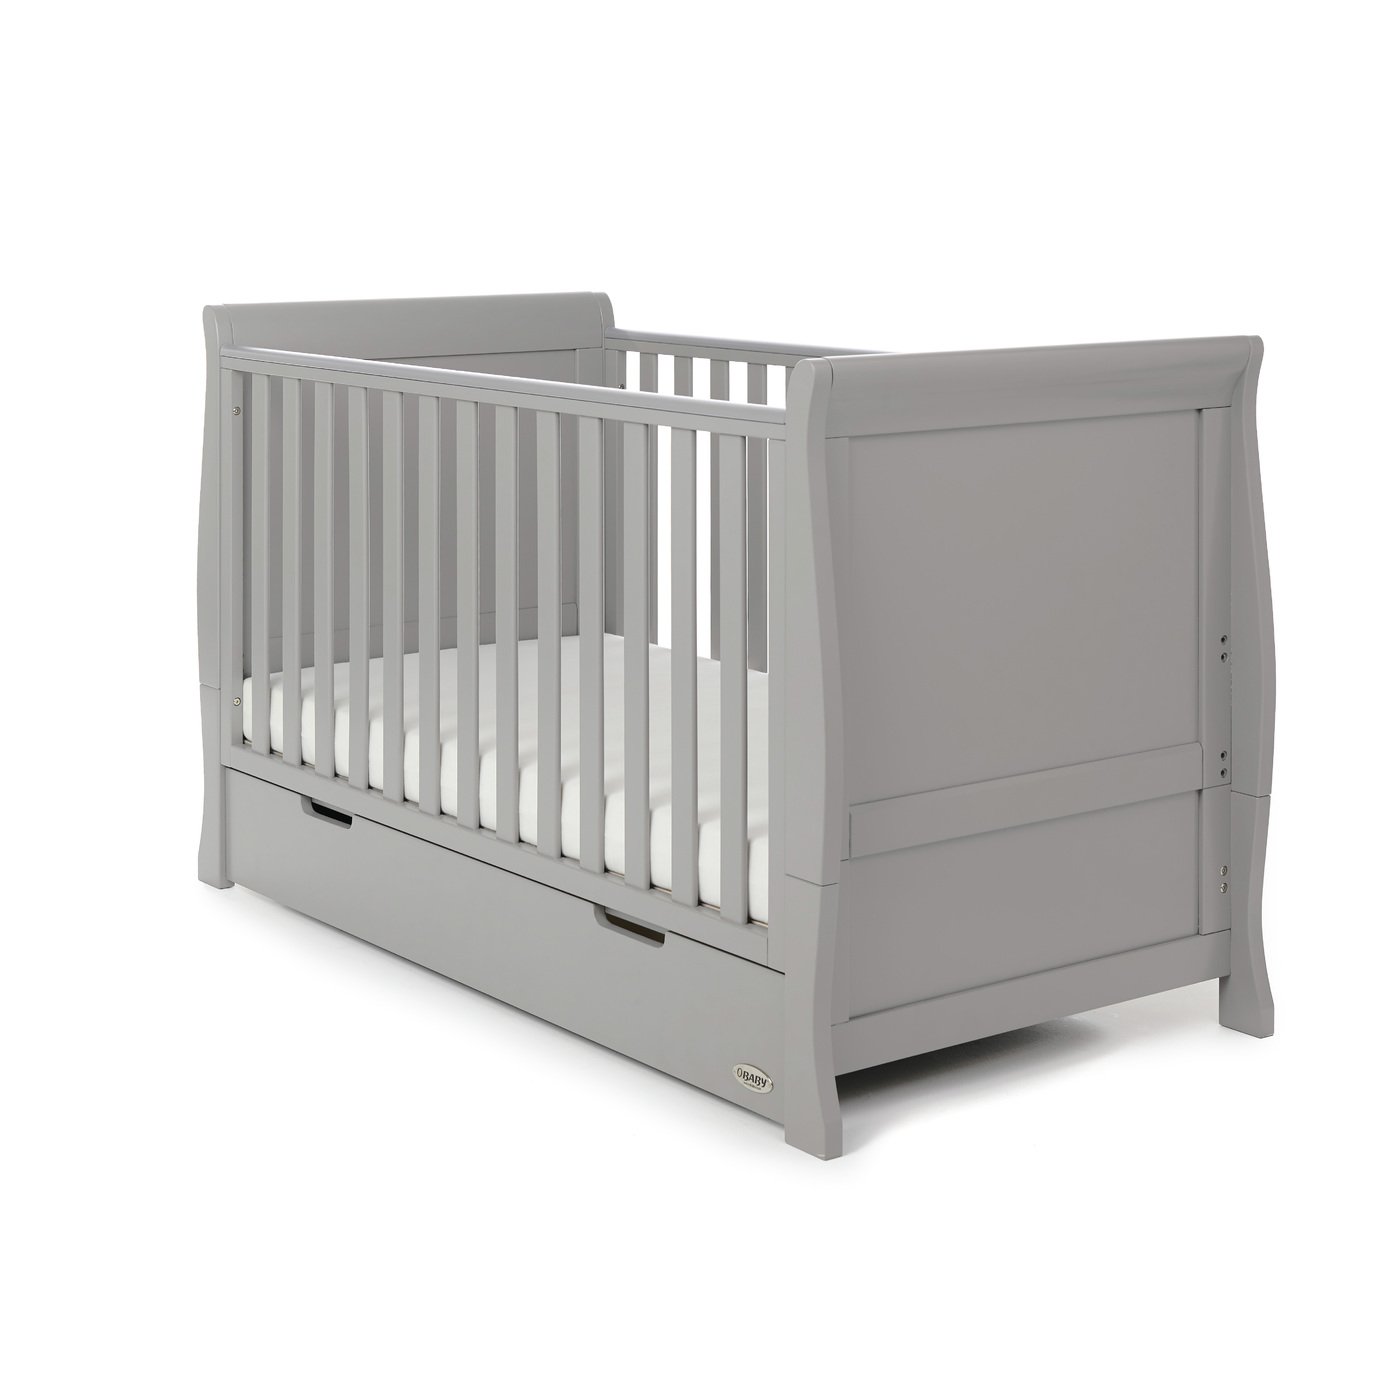 Obaby Stamford Classic Cot Bed Review